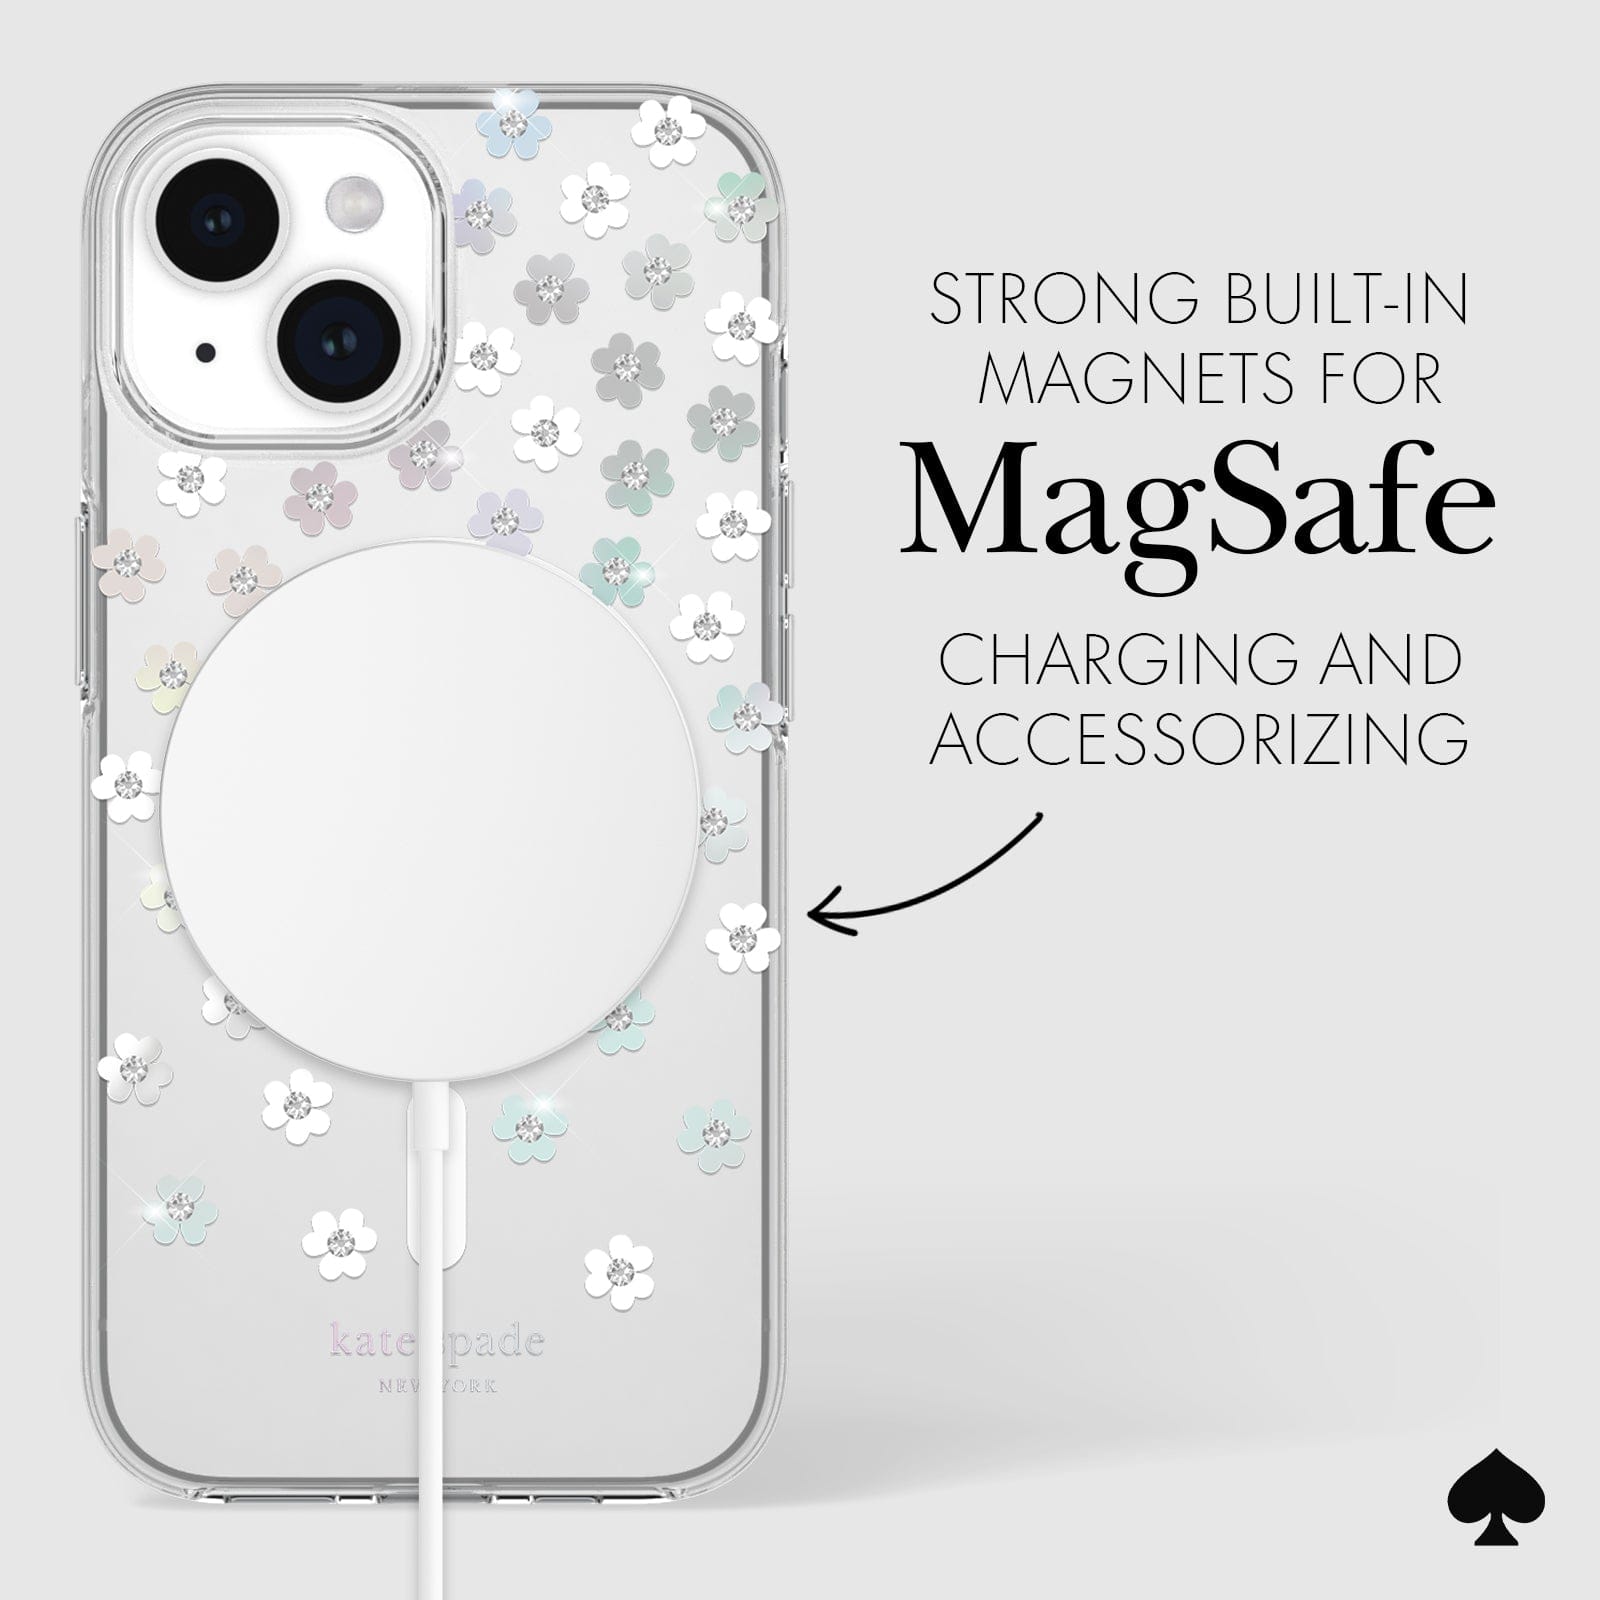 STRONG BUILT-IN MAGNETS FOR MAGSAFE CHARGING AND ACCESSORIZING